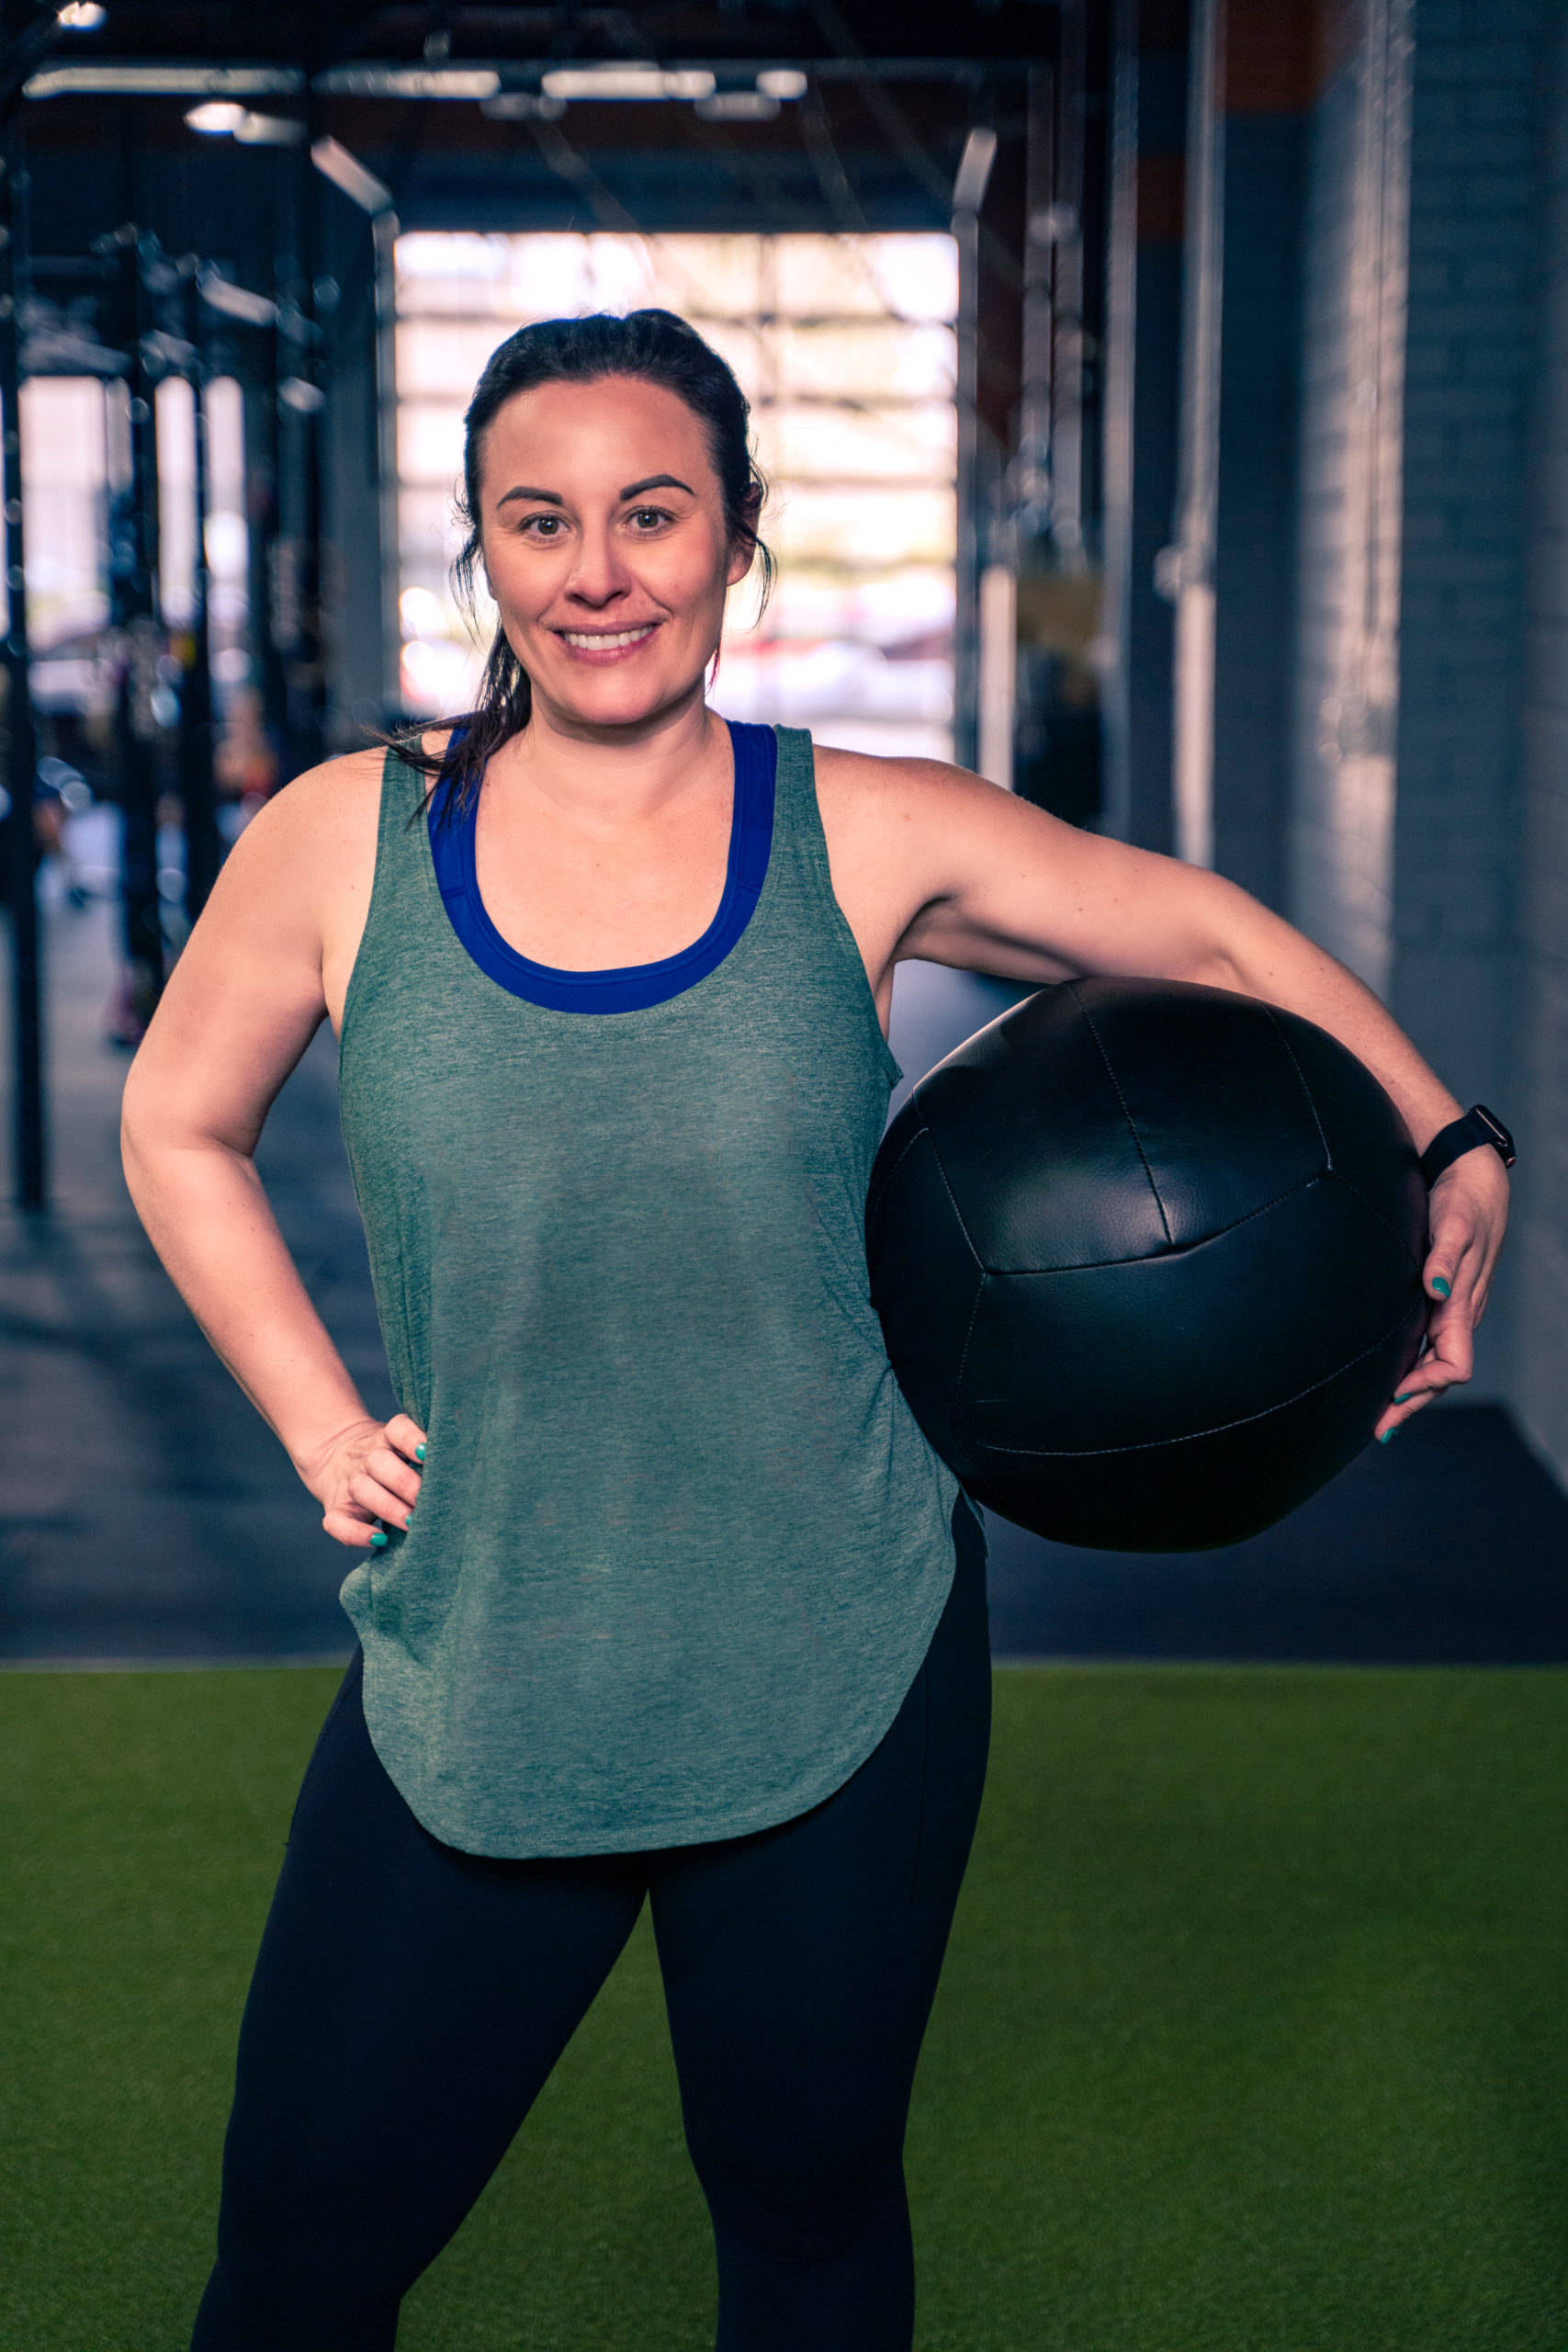 Woman at the gym holding weighted ball